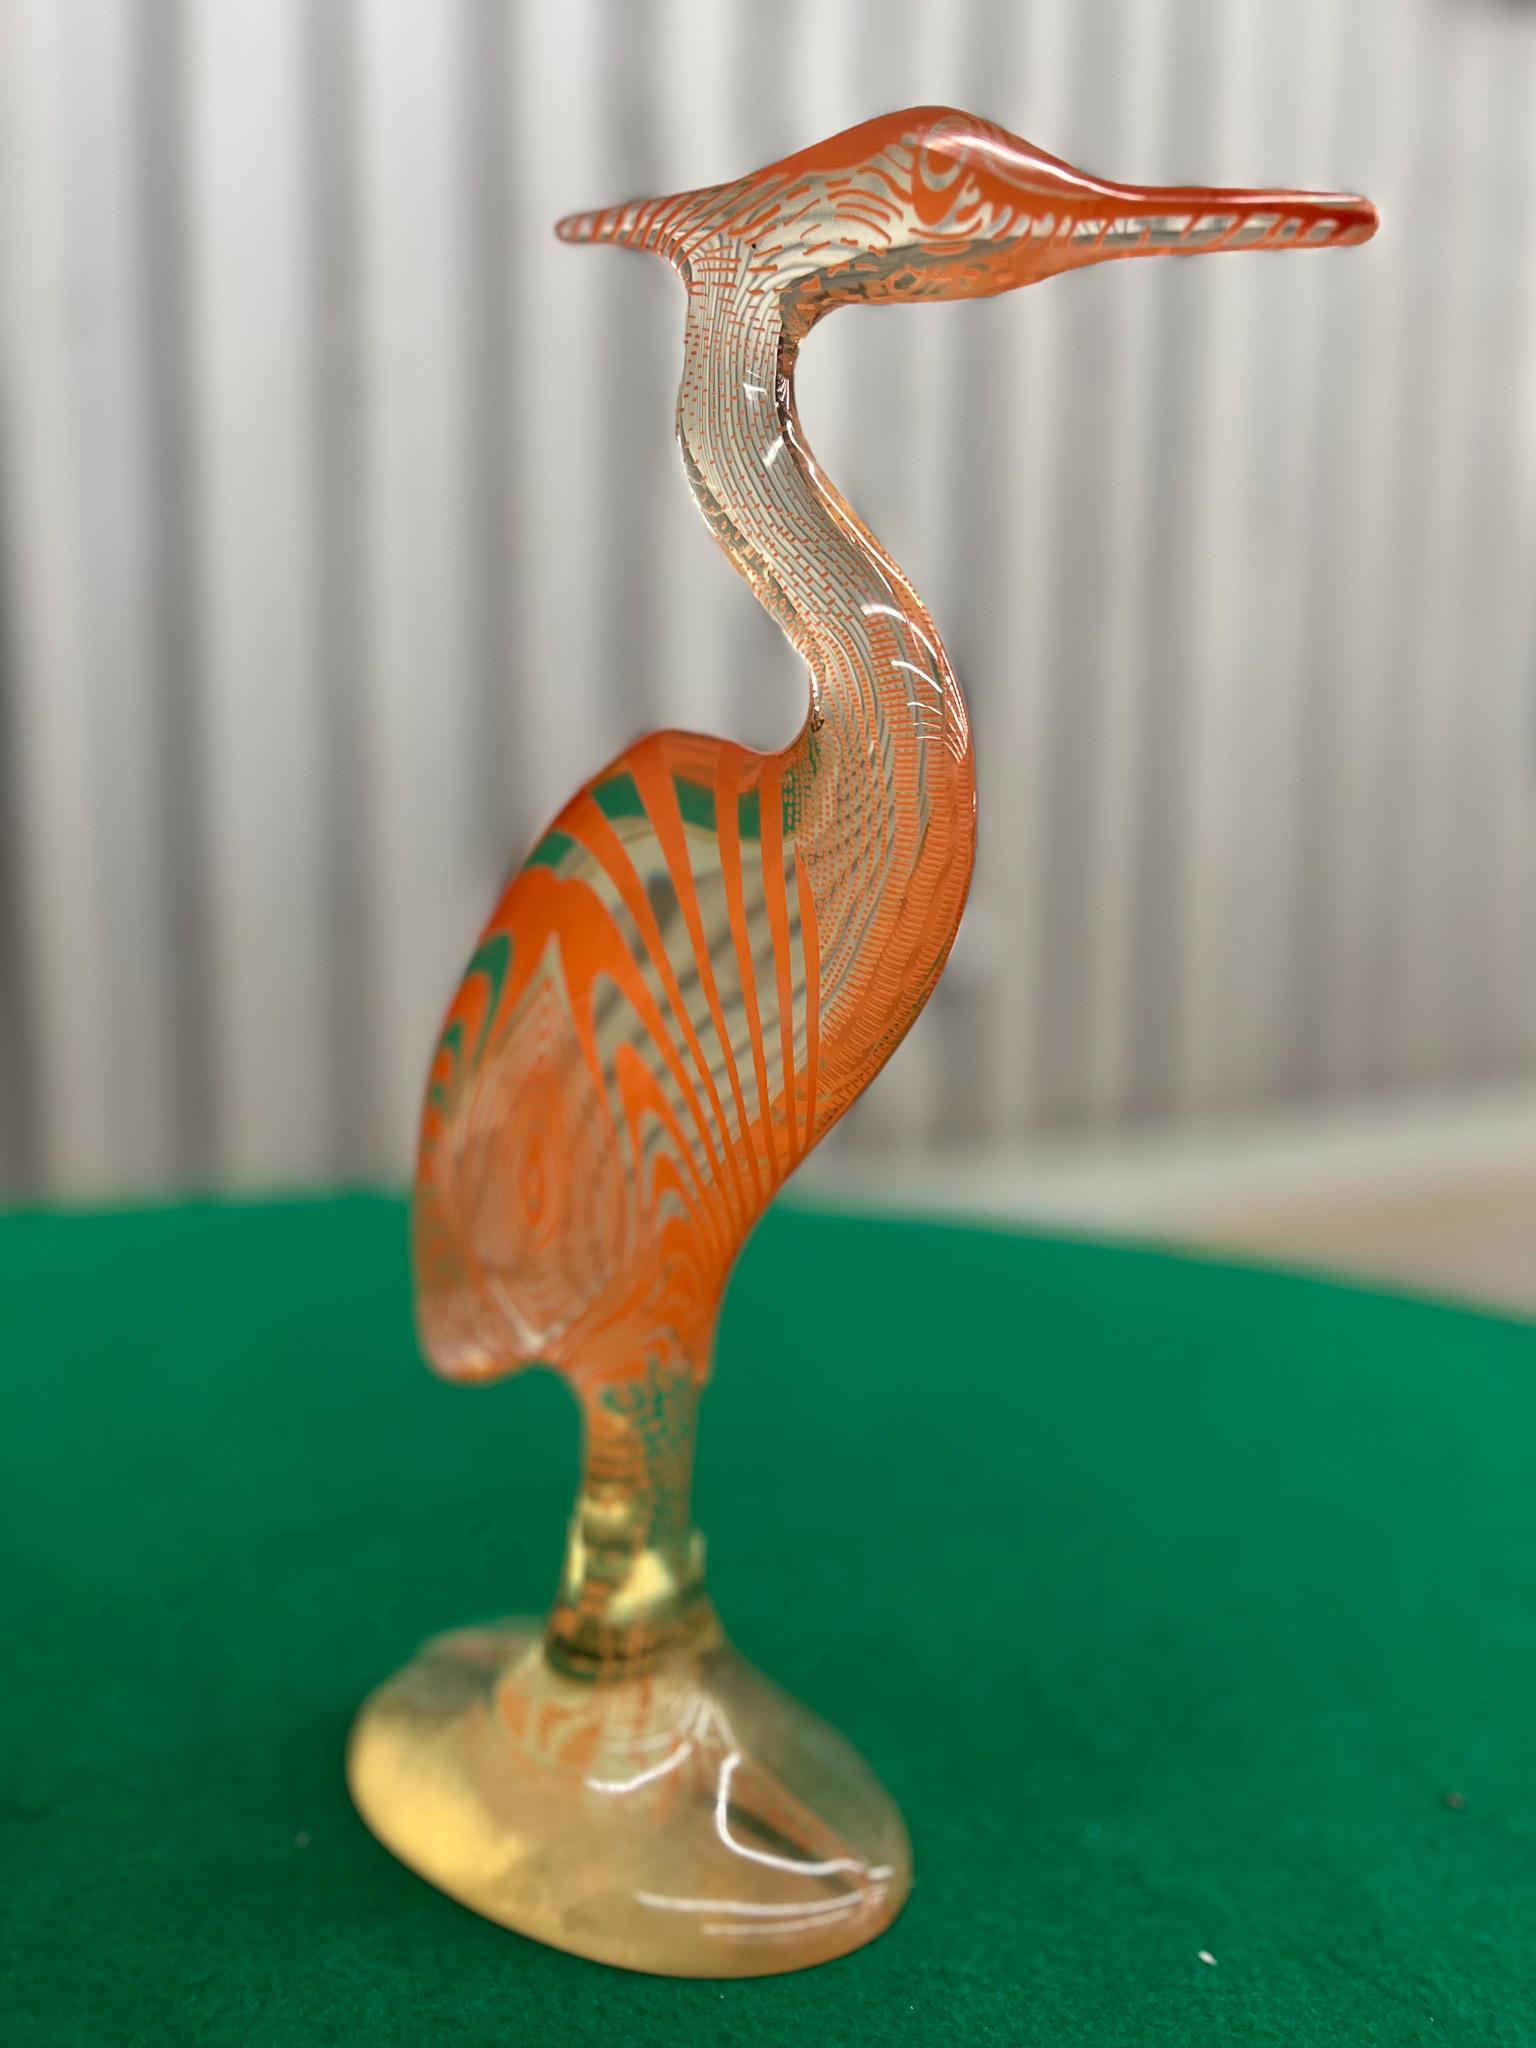 Hand-Crafted Brazilian Modern Kinetic Sculpture of Heron in Resin, Abraham Palatinik, 1960s For Sale